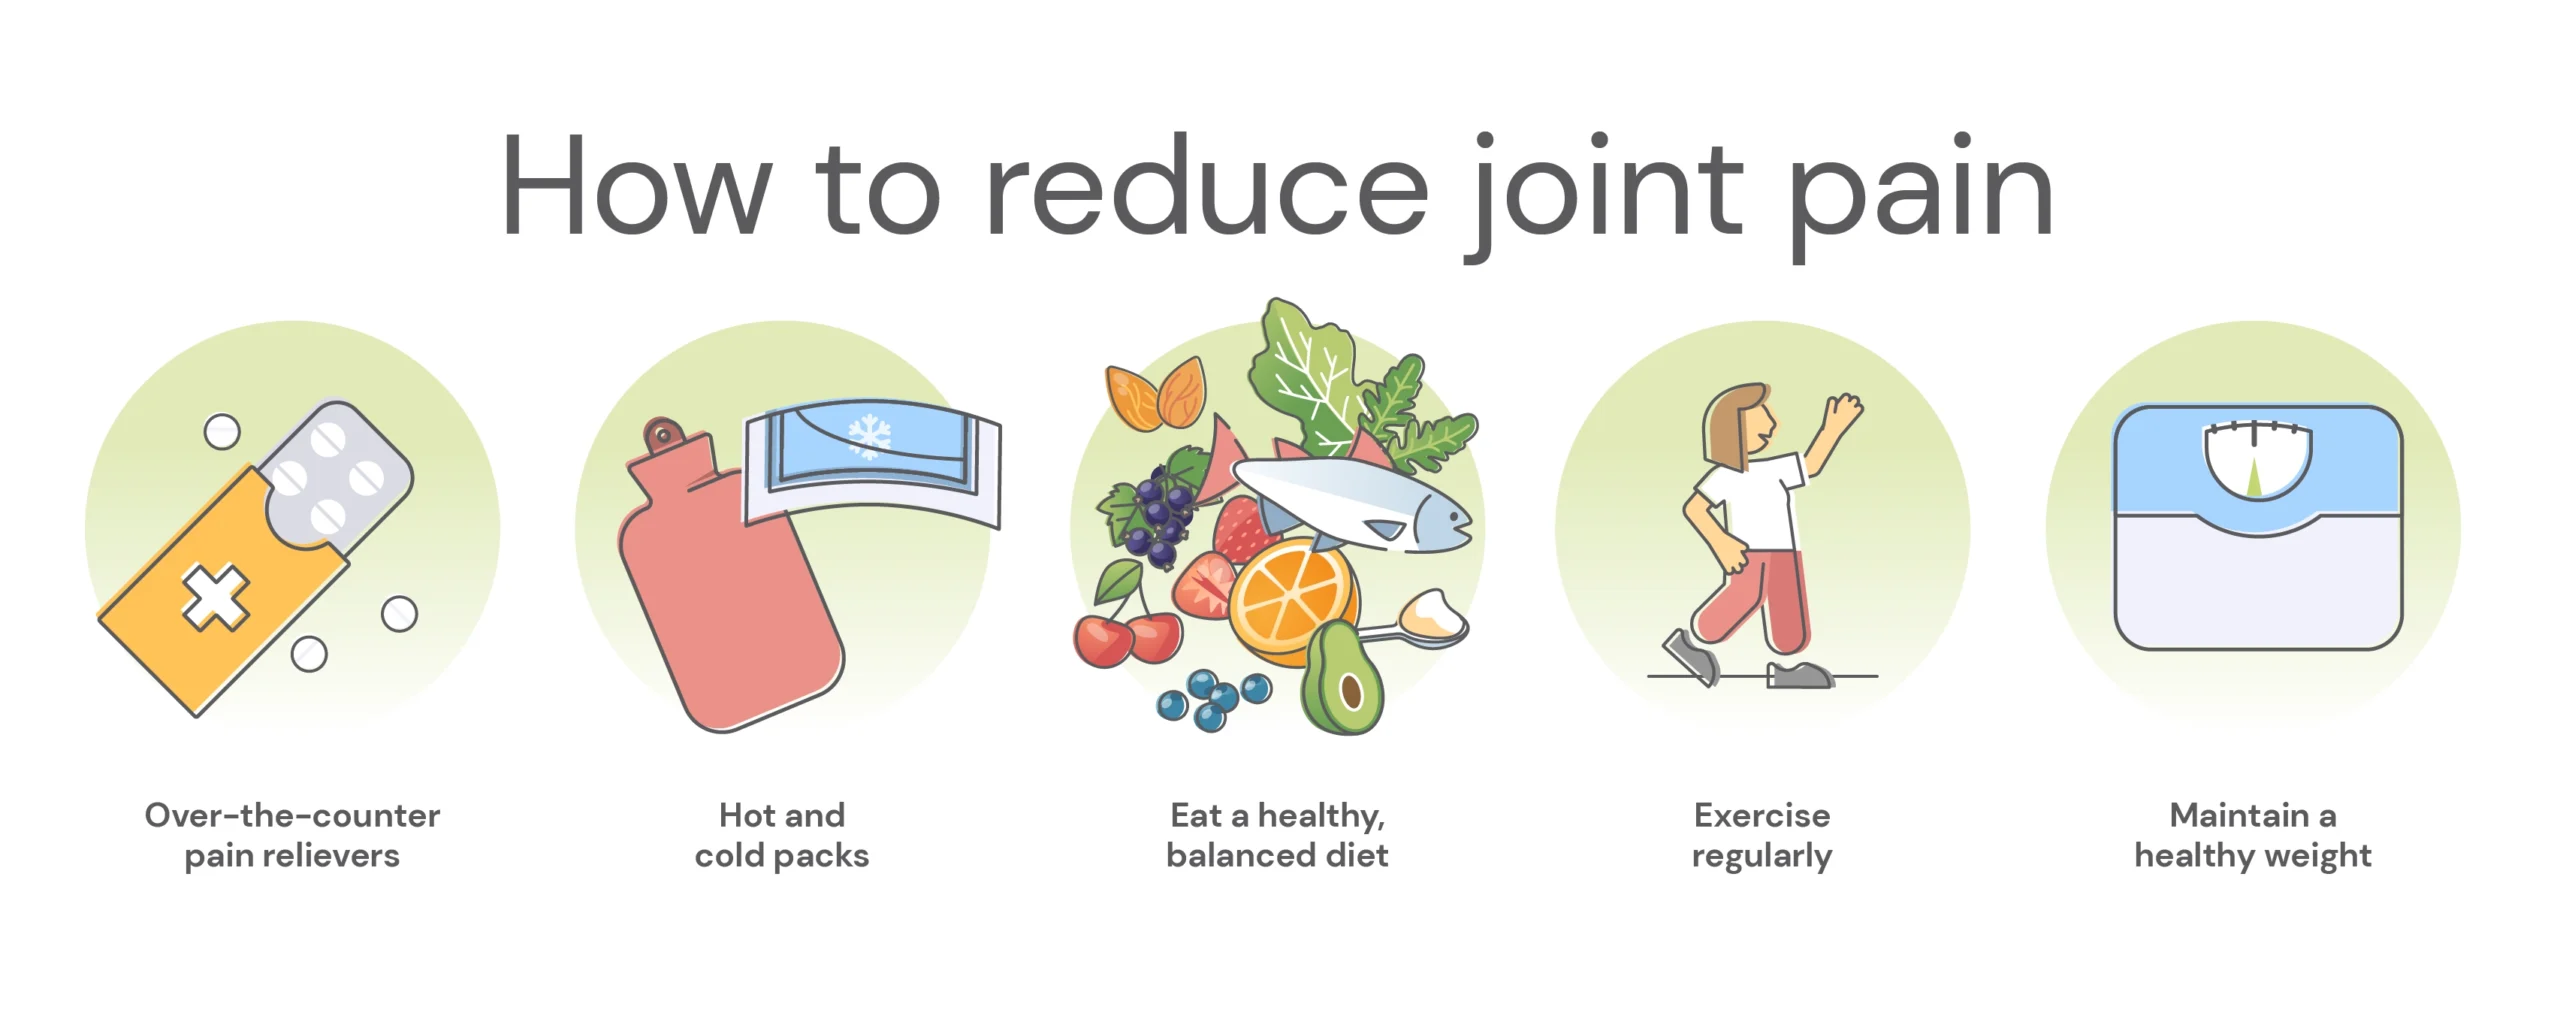 How to reduce joint pain tips scaled